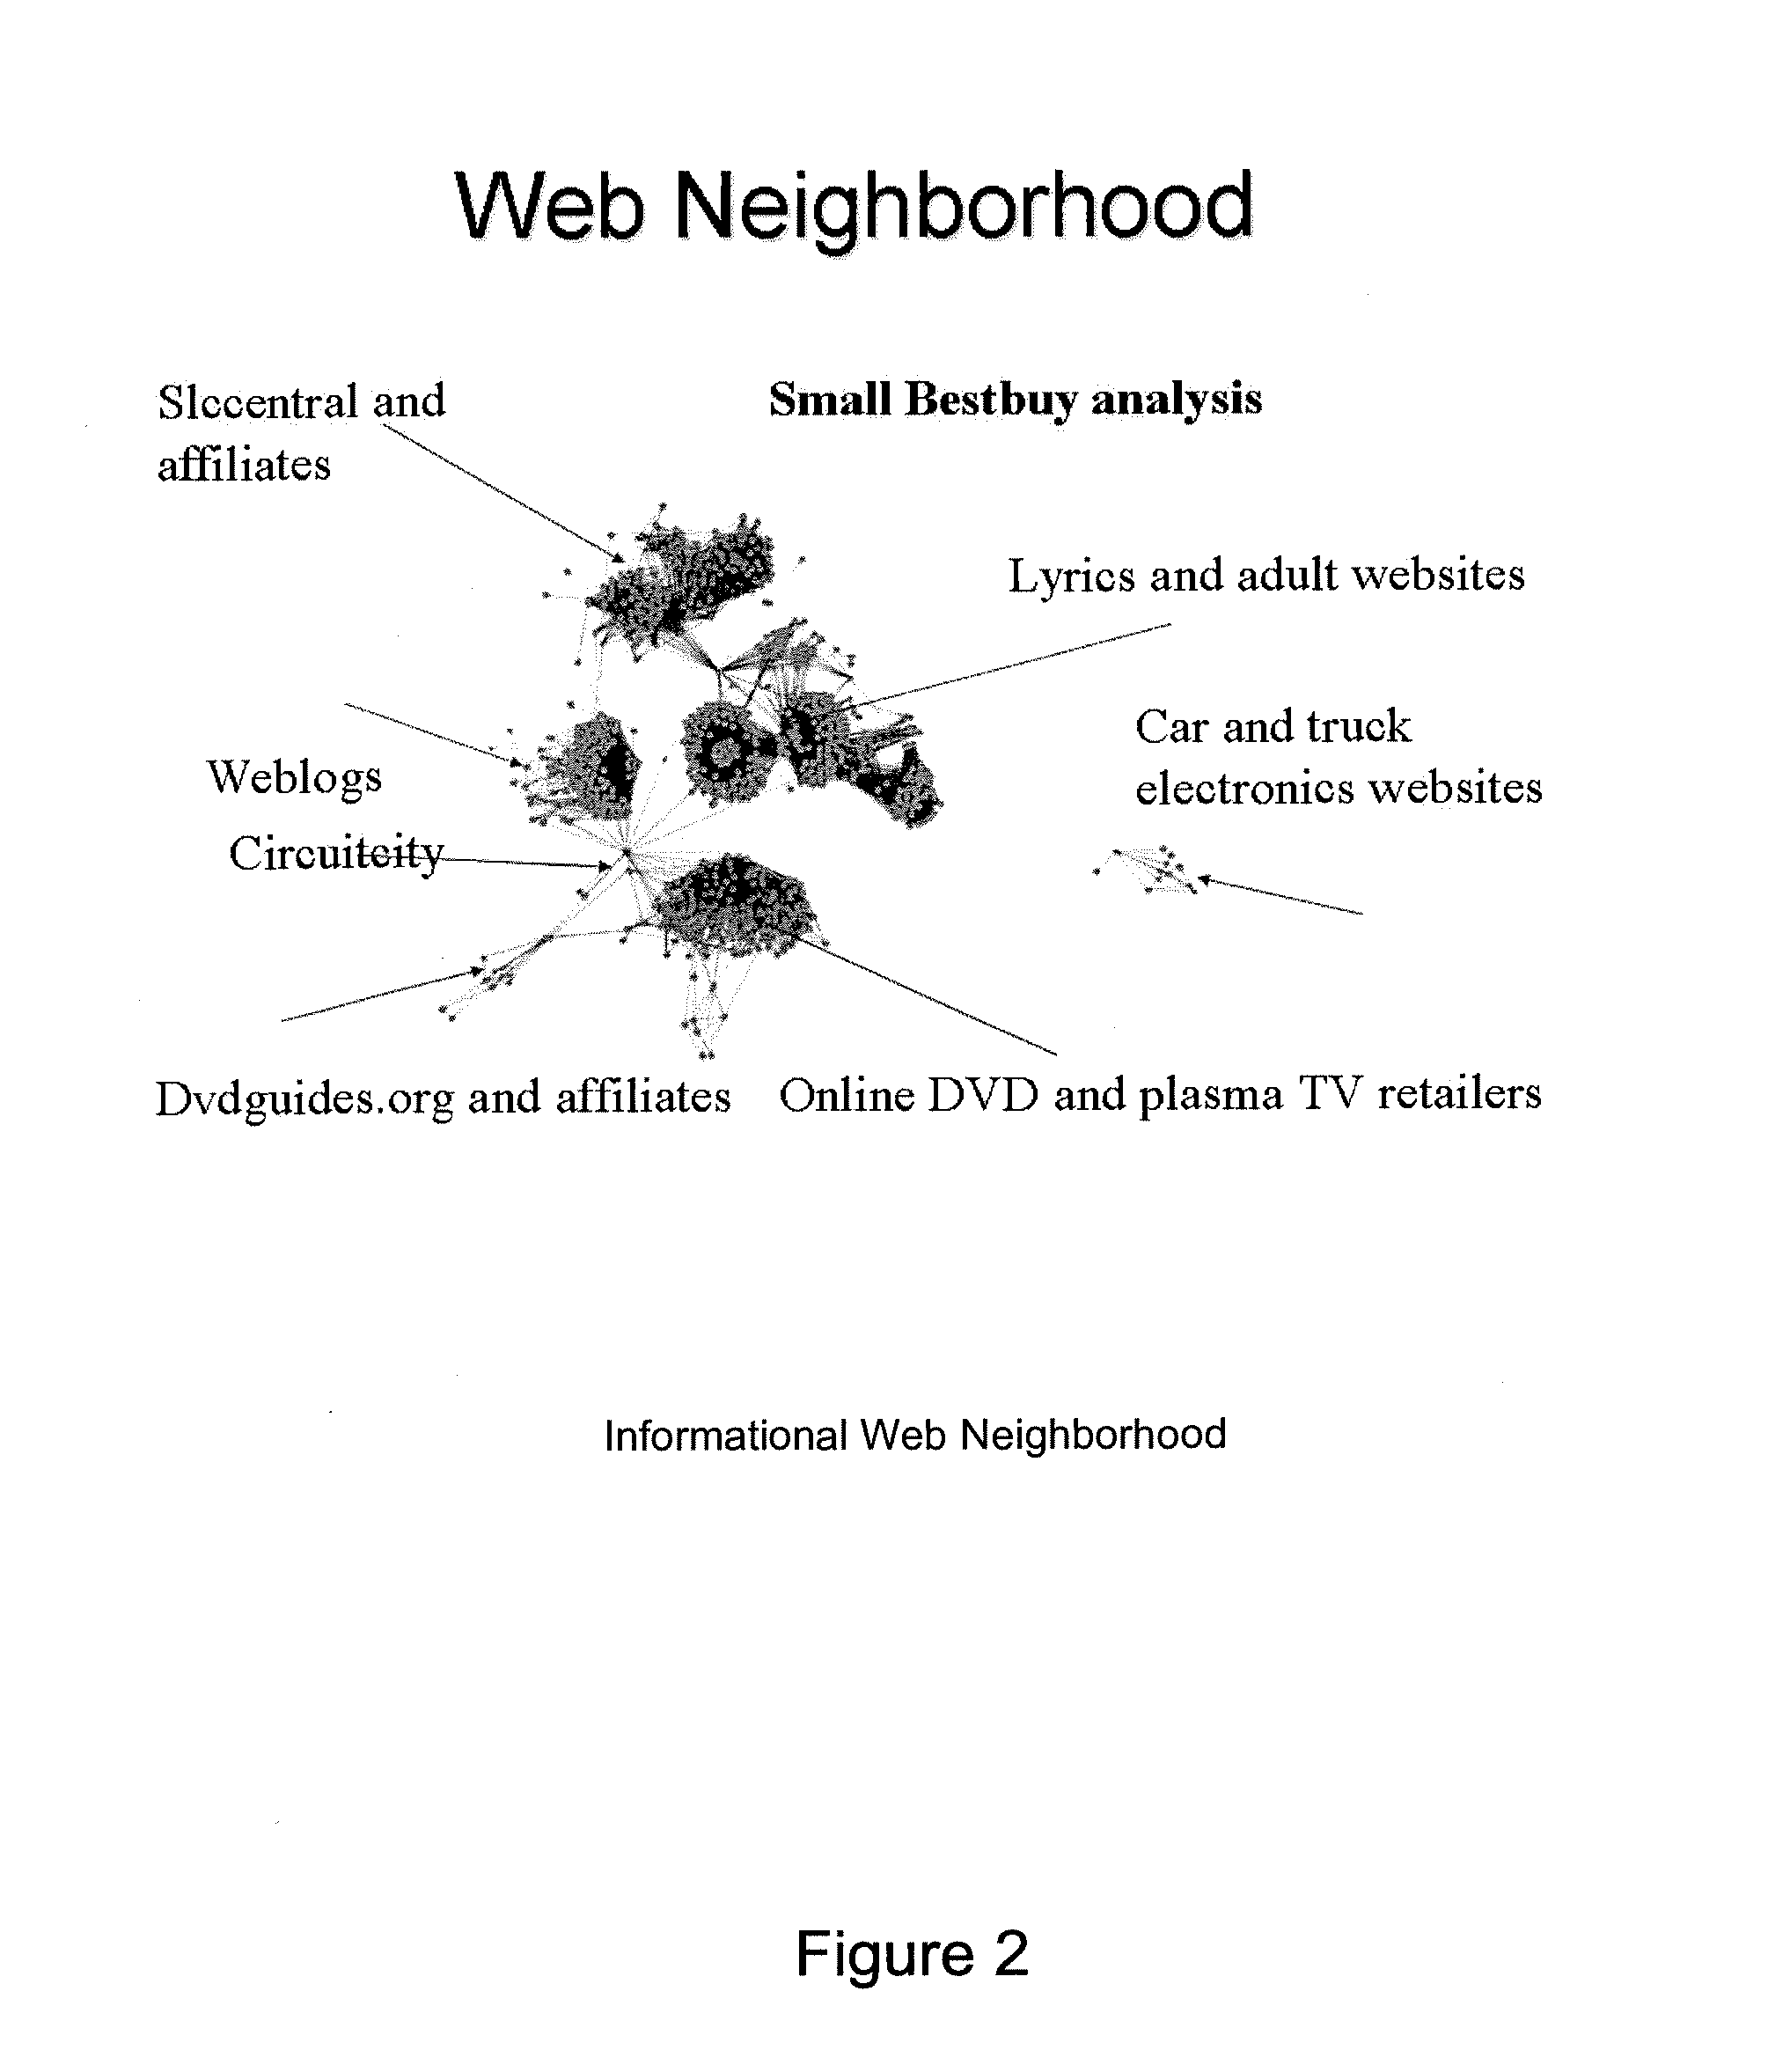 Systems and methods for creating, navigating, and searching informational web neighborhoods